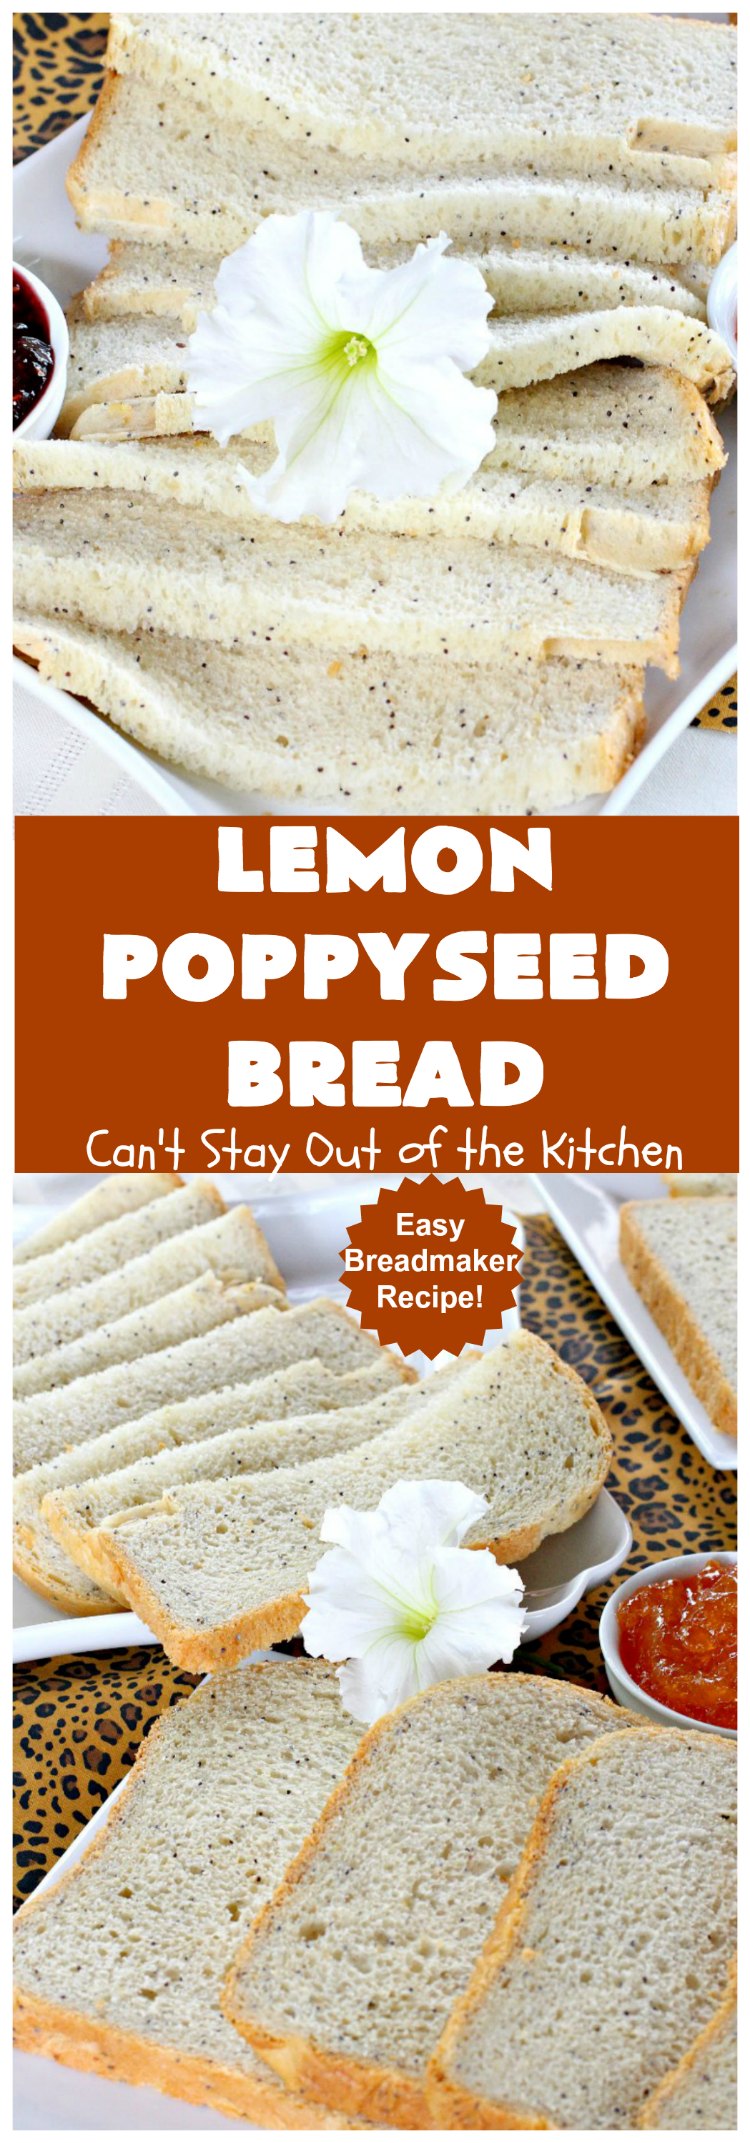 Lemon Poppyseed Bread | Can't Stay Out of the Kitchen | this delicious home-baked #bread is so easy since it's made in the #breadmaker. It's light and fluffy & terrific for #breakfast or dinner. #lemon #poppyseeds #LemonPoppySeedBread 